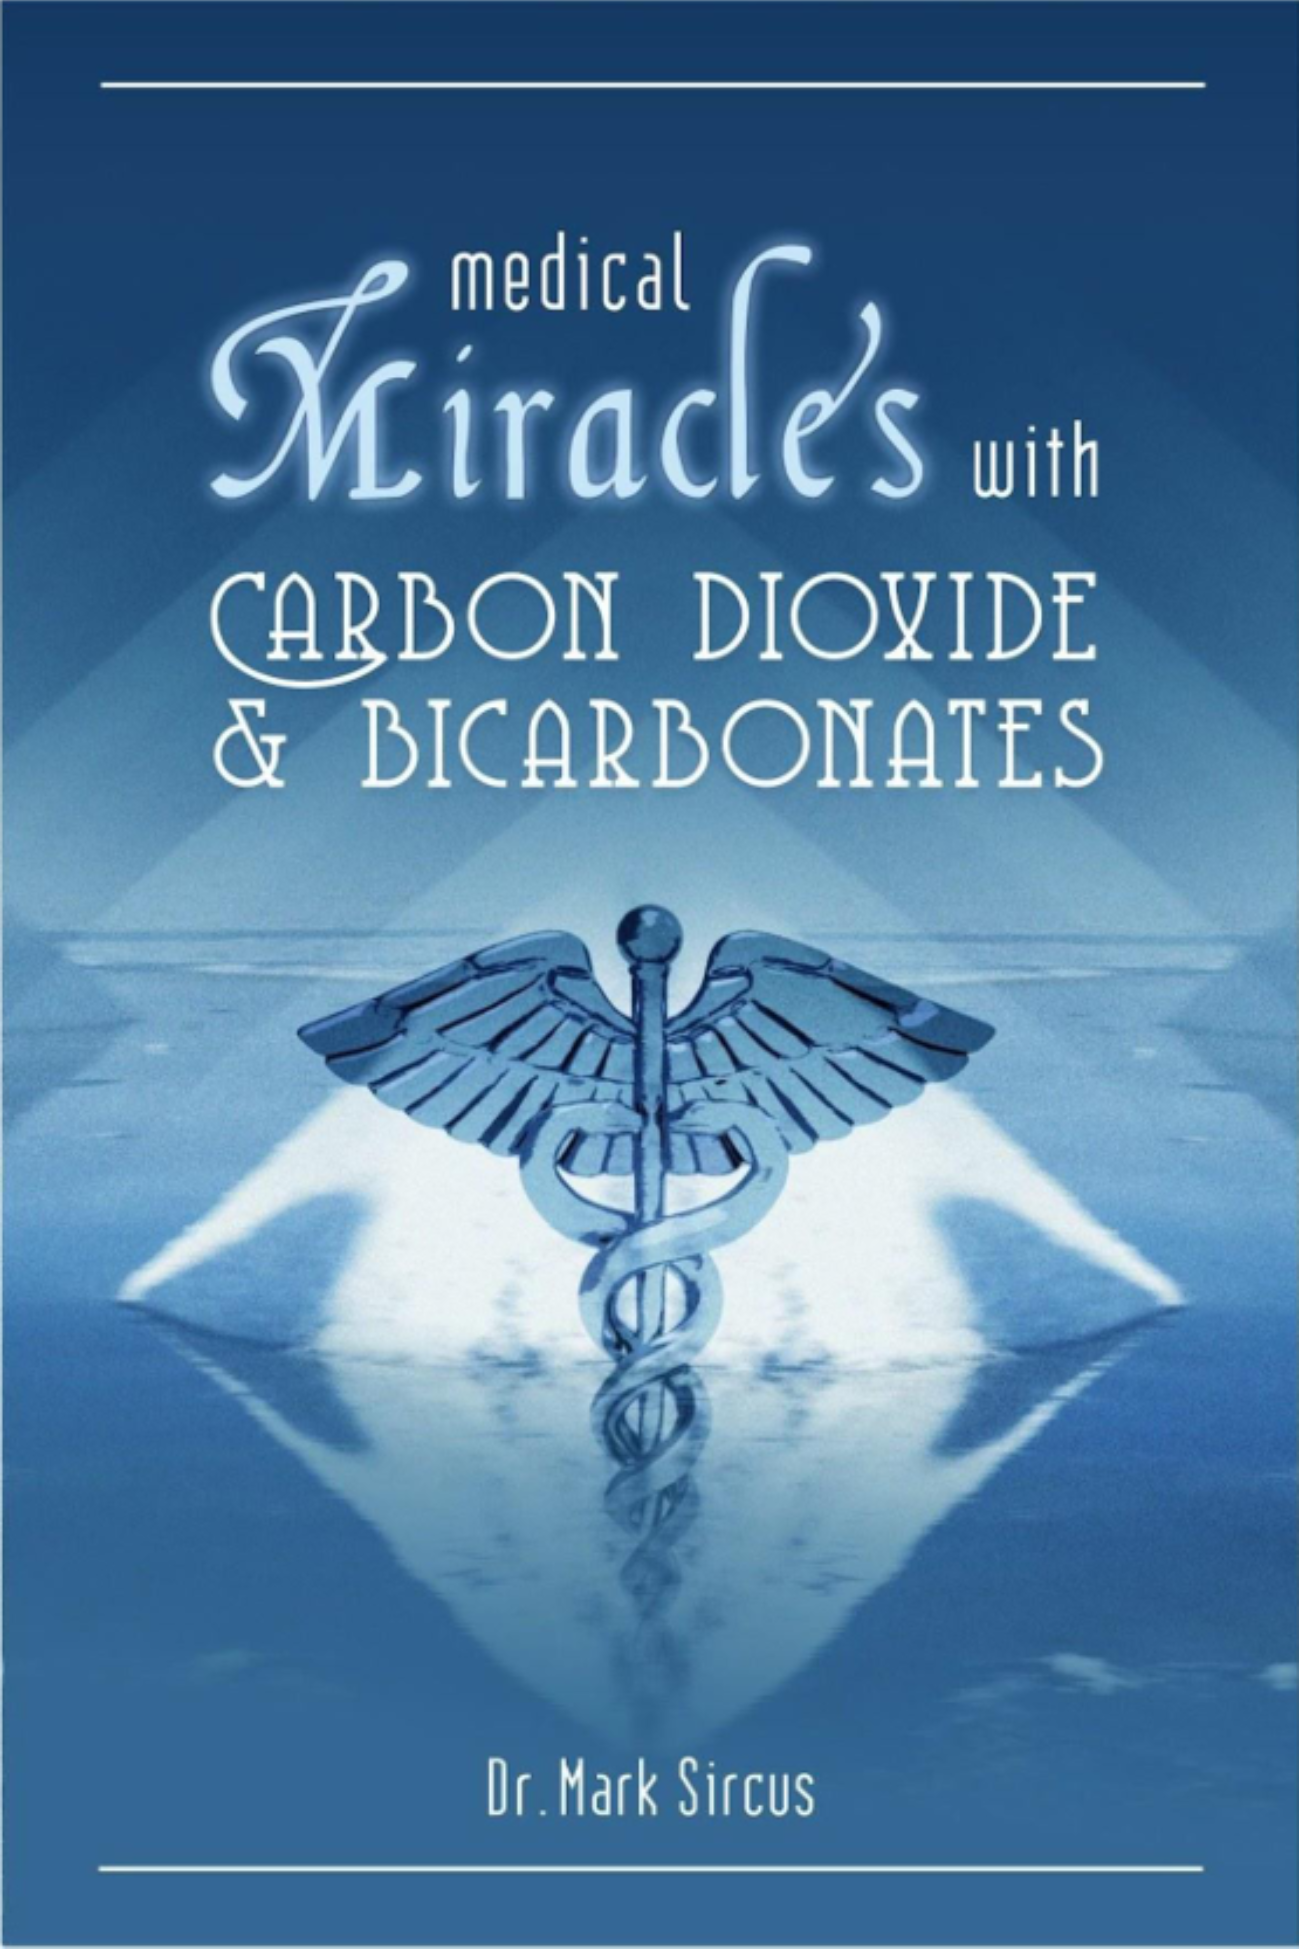 Medical Miracle's with Carbon Dioxide & Bicarbonates Dr. Sircus book image